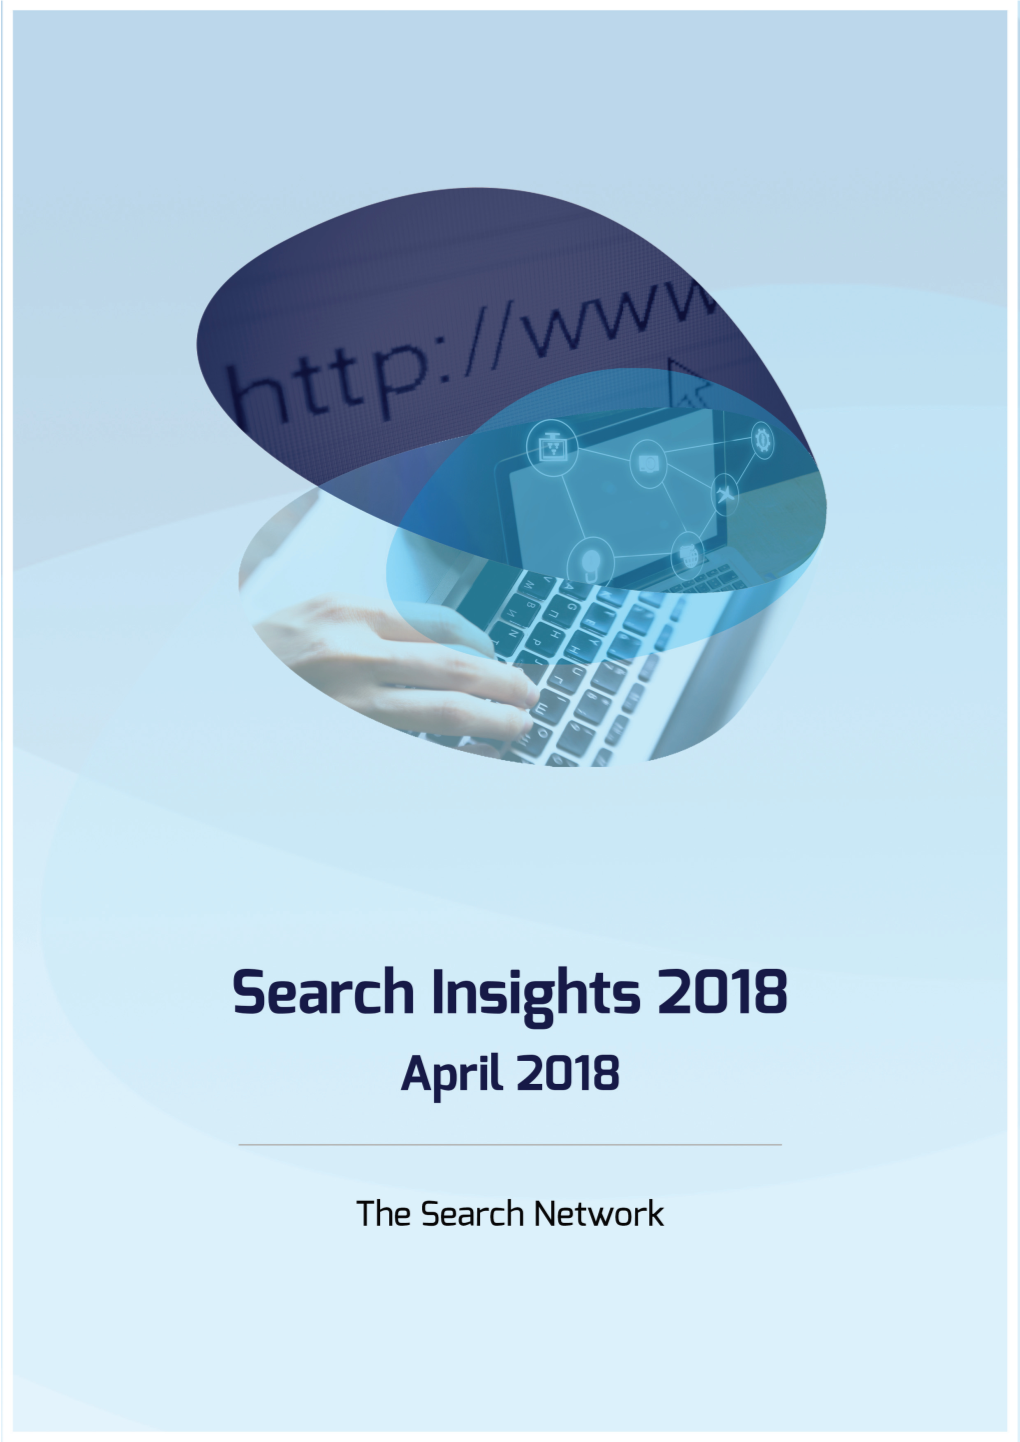 Search Insights 2018 Introduction Martin White